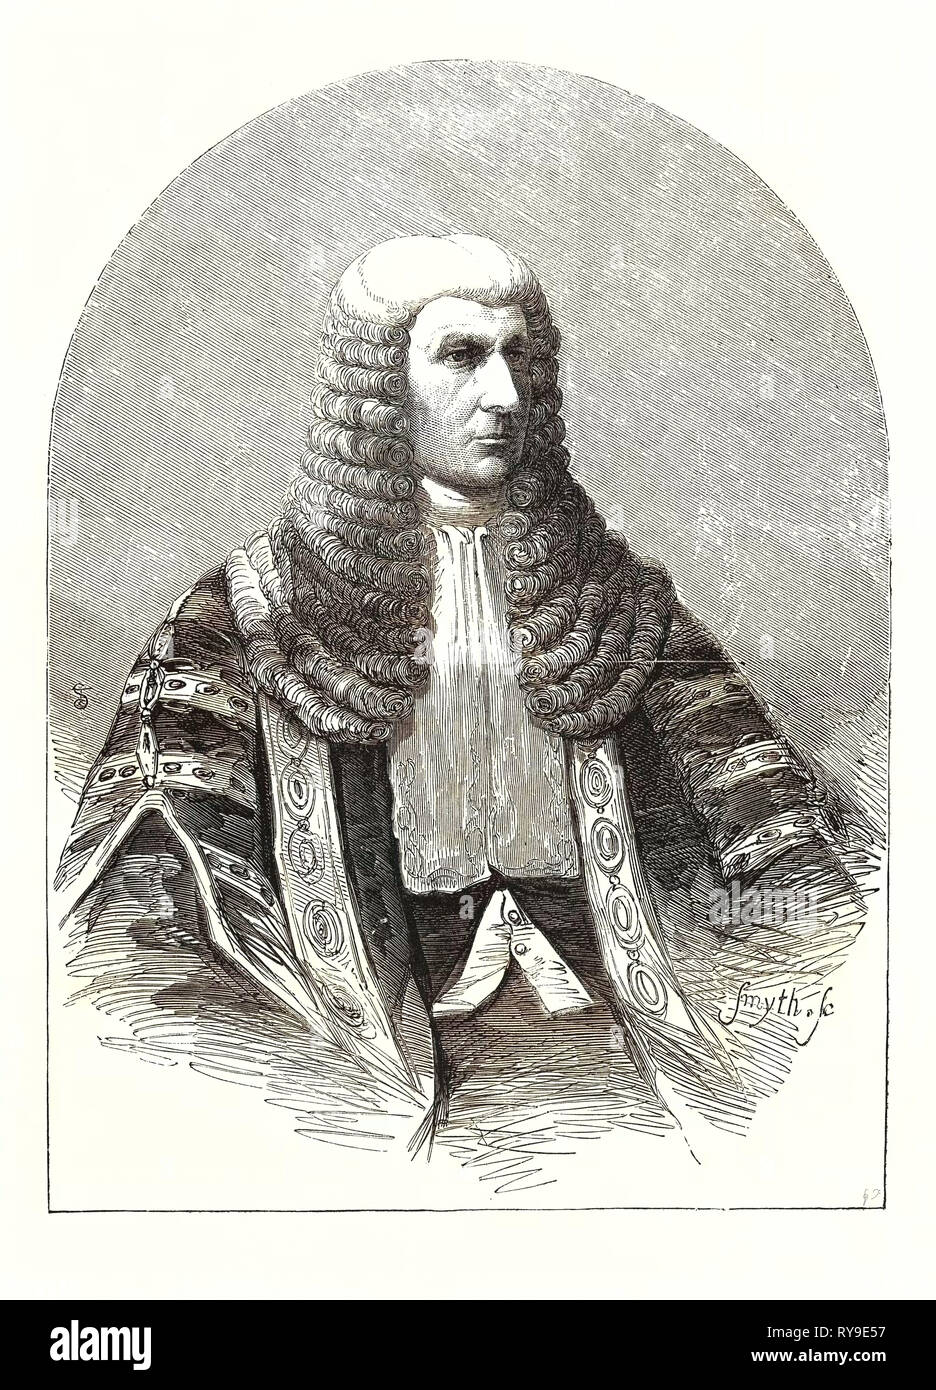 The New Speaker of the House of Commons, the Right Hon. John Evelyn Denison: Elected April 30, 1857. British Statesman. UK, Britain, British, Europe, United Kingdom, Great Britain, European Stock Photo